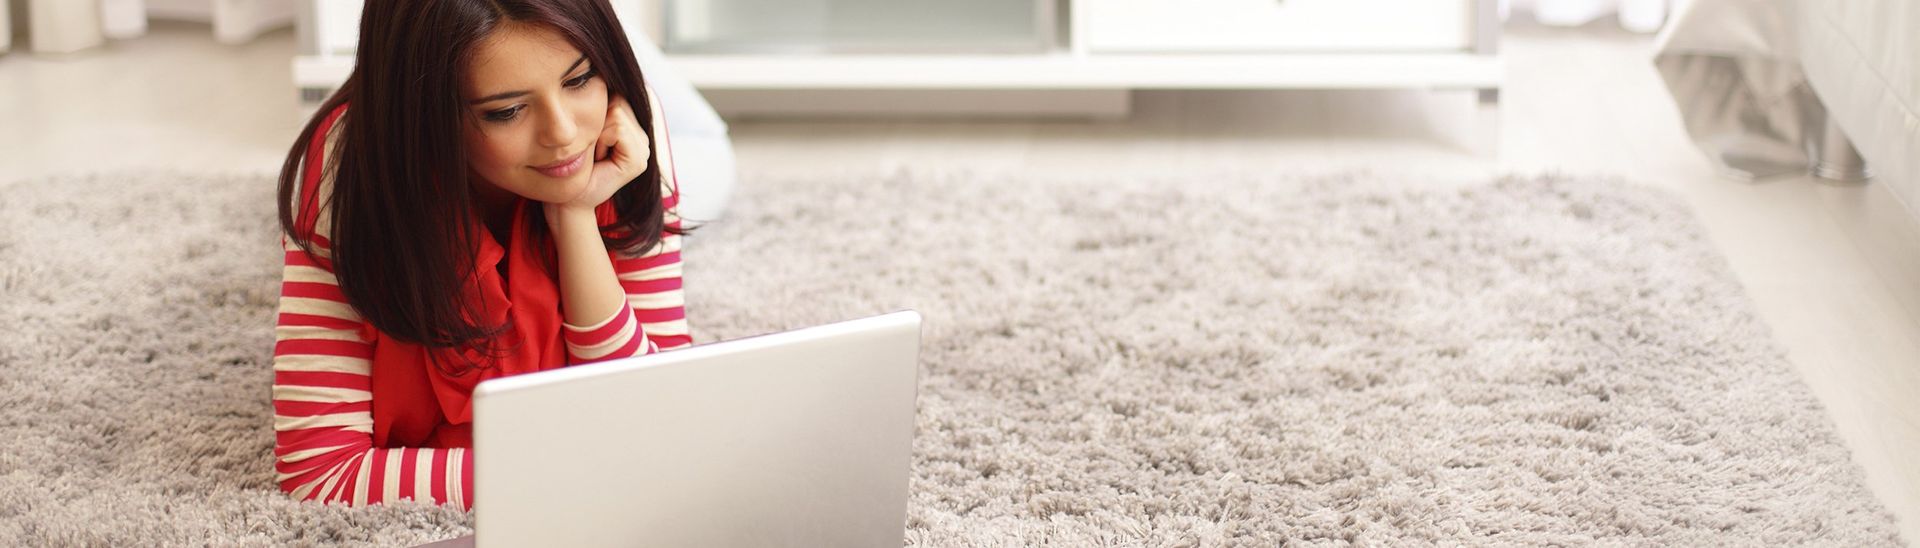 Woman lying on a carpet looking at her laptop